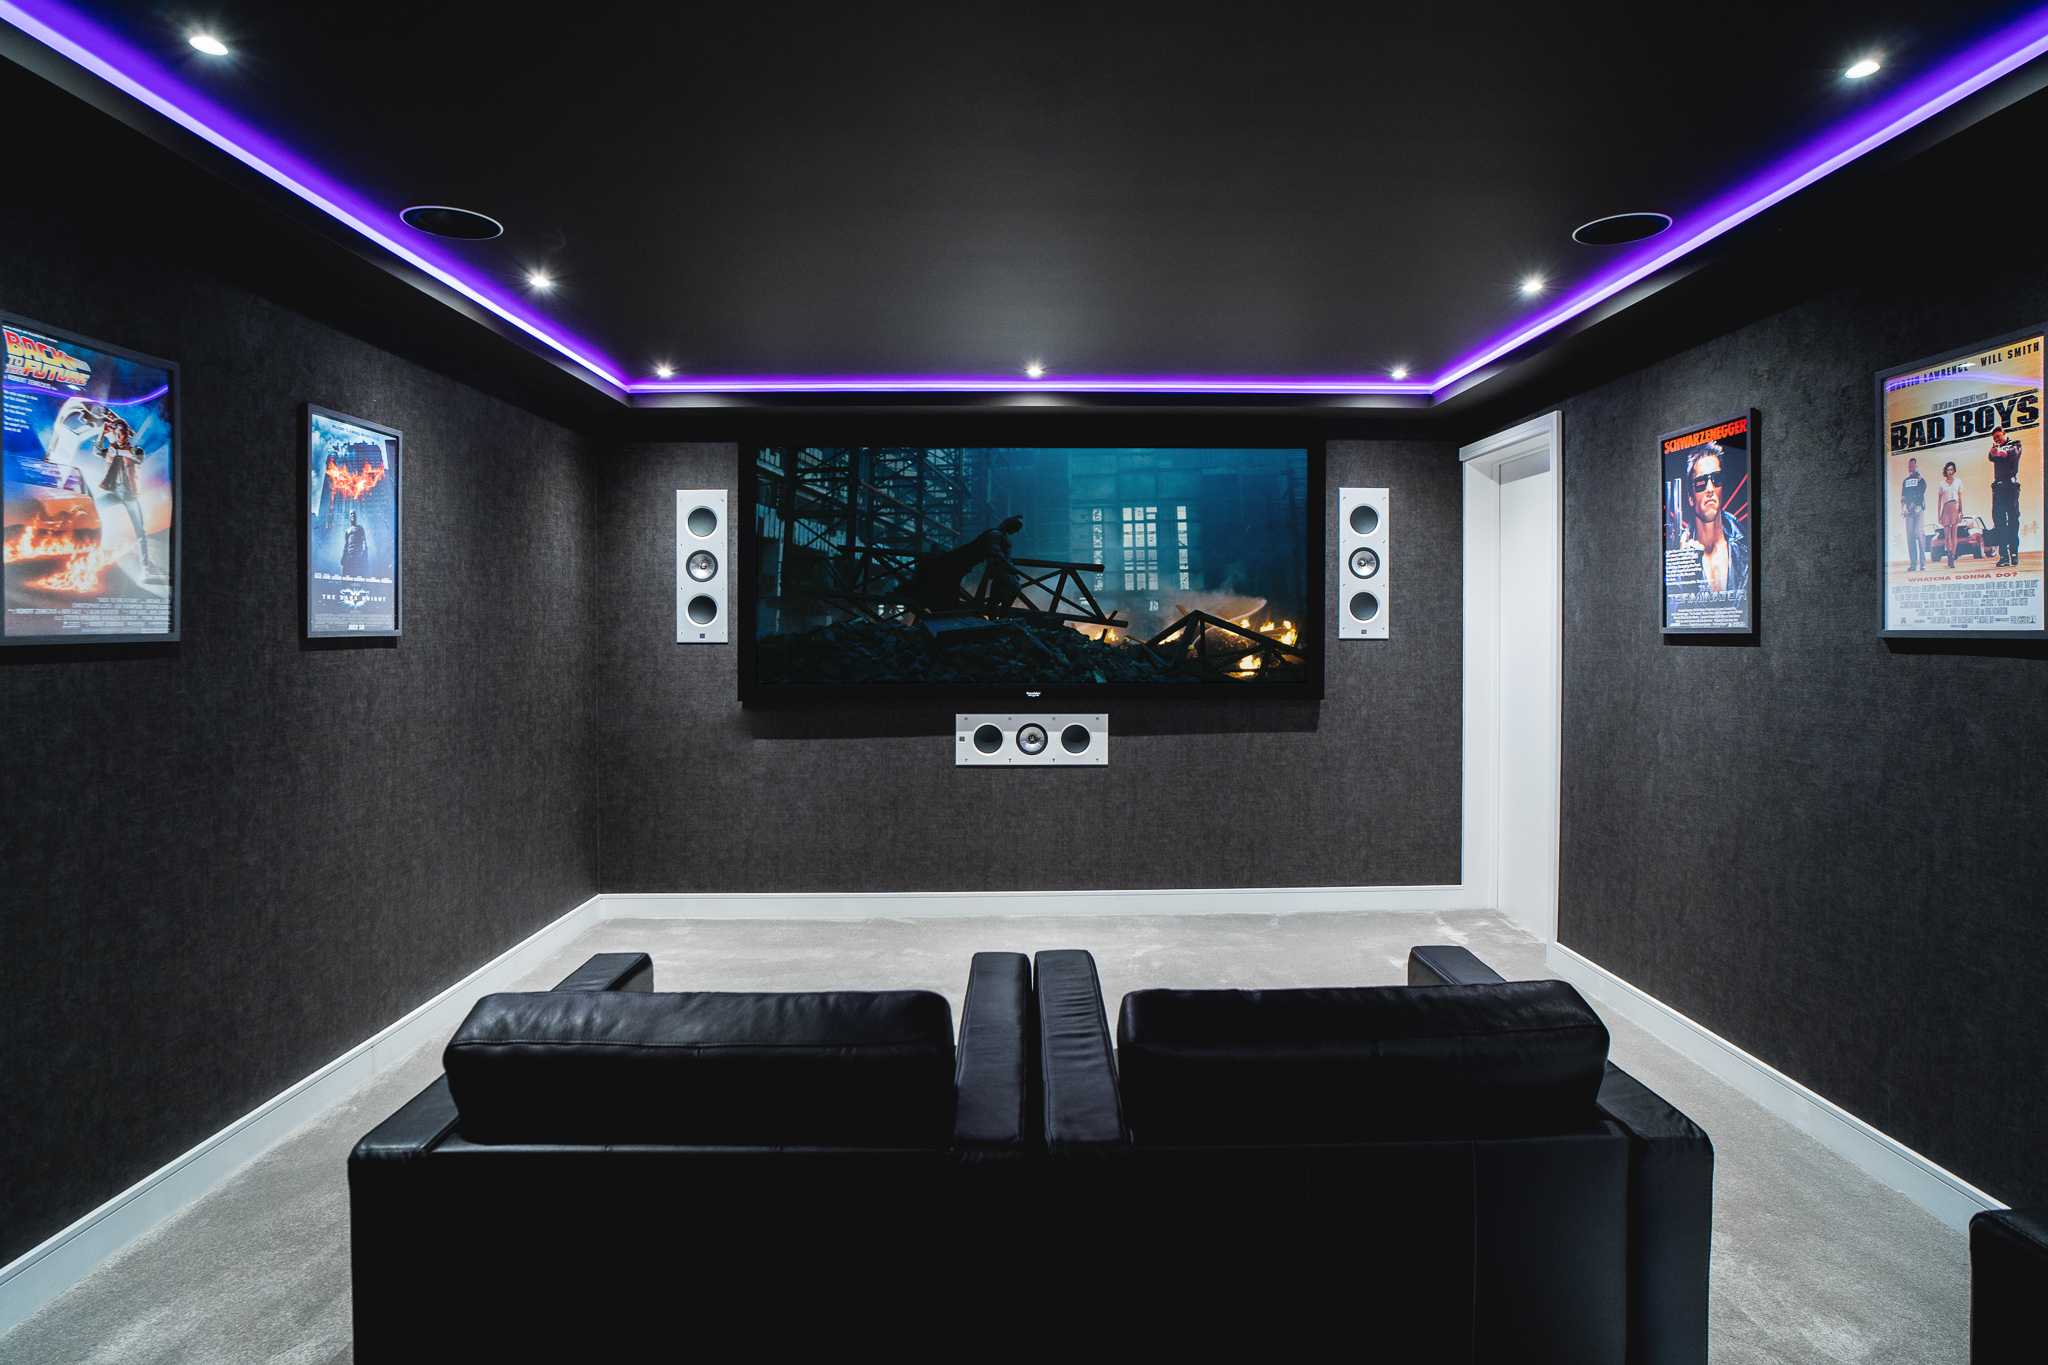 KEF THX reference in-wall speakers were used to create the Dolby Atmos 7.2.2 immersive surround sound